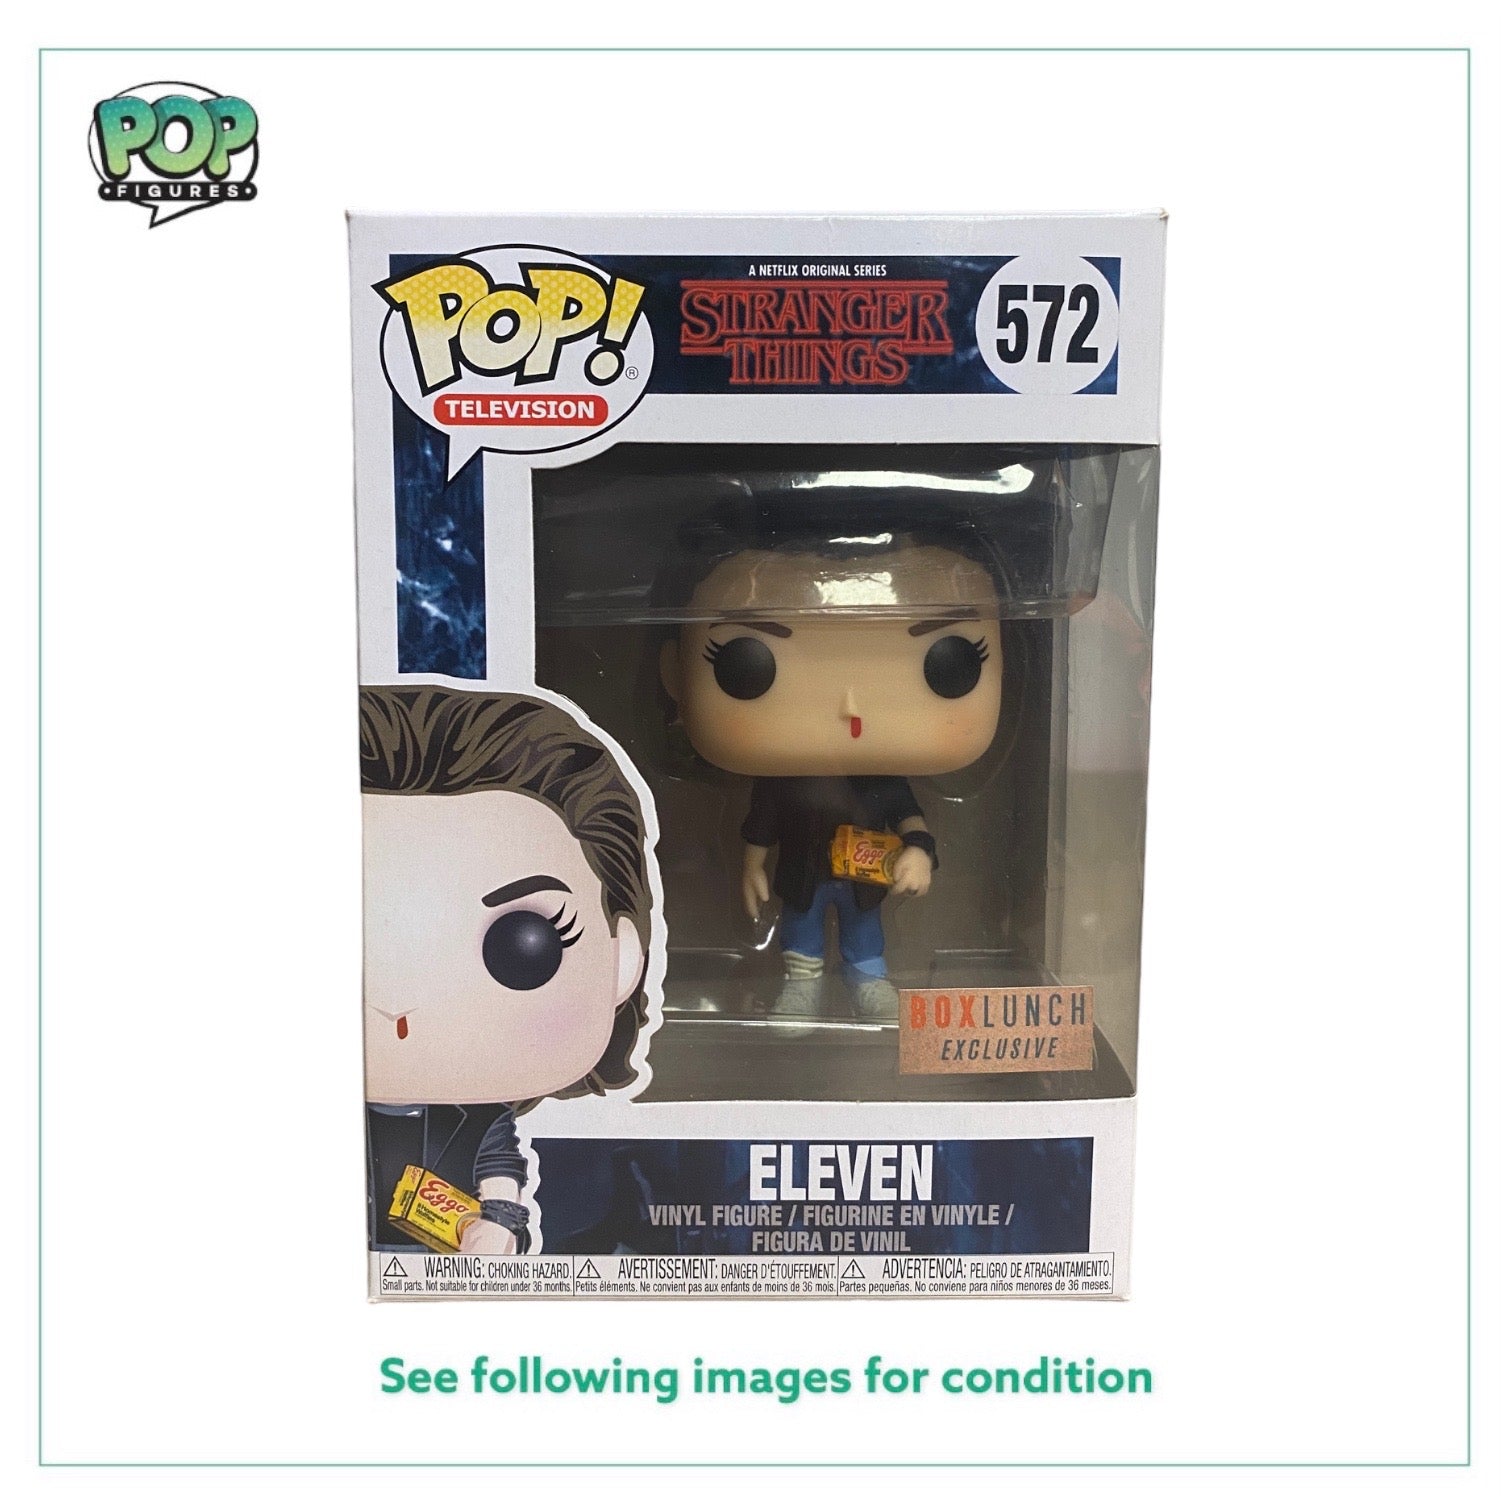 Eleven #572 (Punk) Funko Pop! - Stranger Things - Box Lunch Exclusive - Condition 7/10